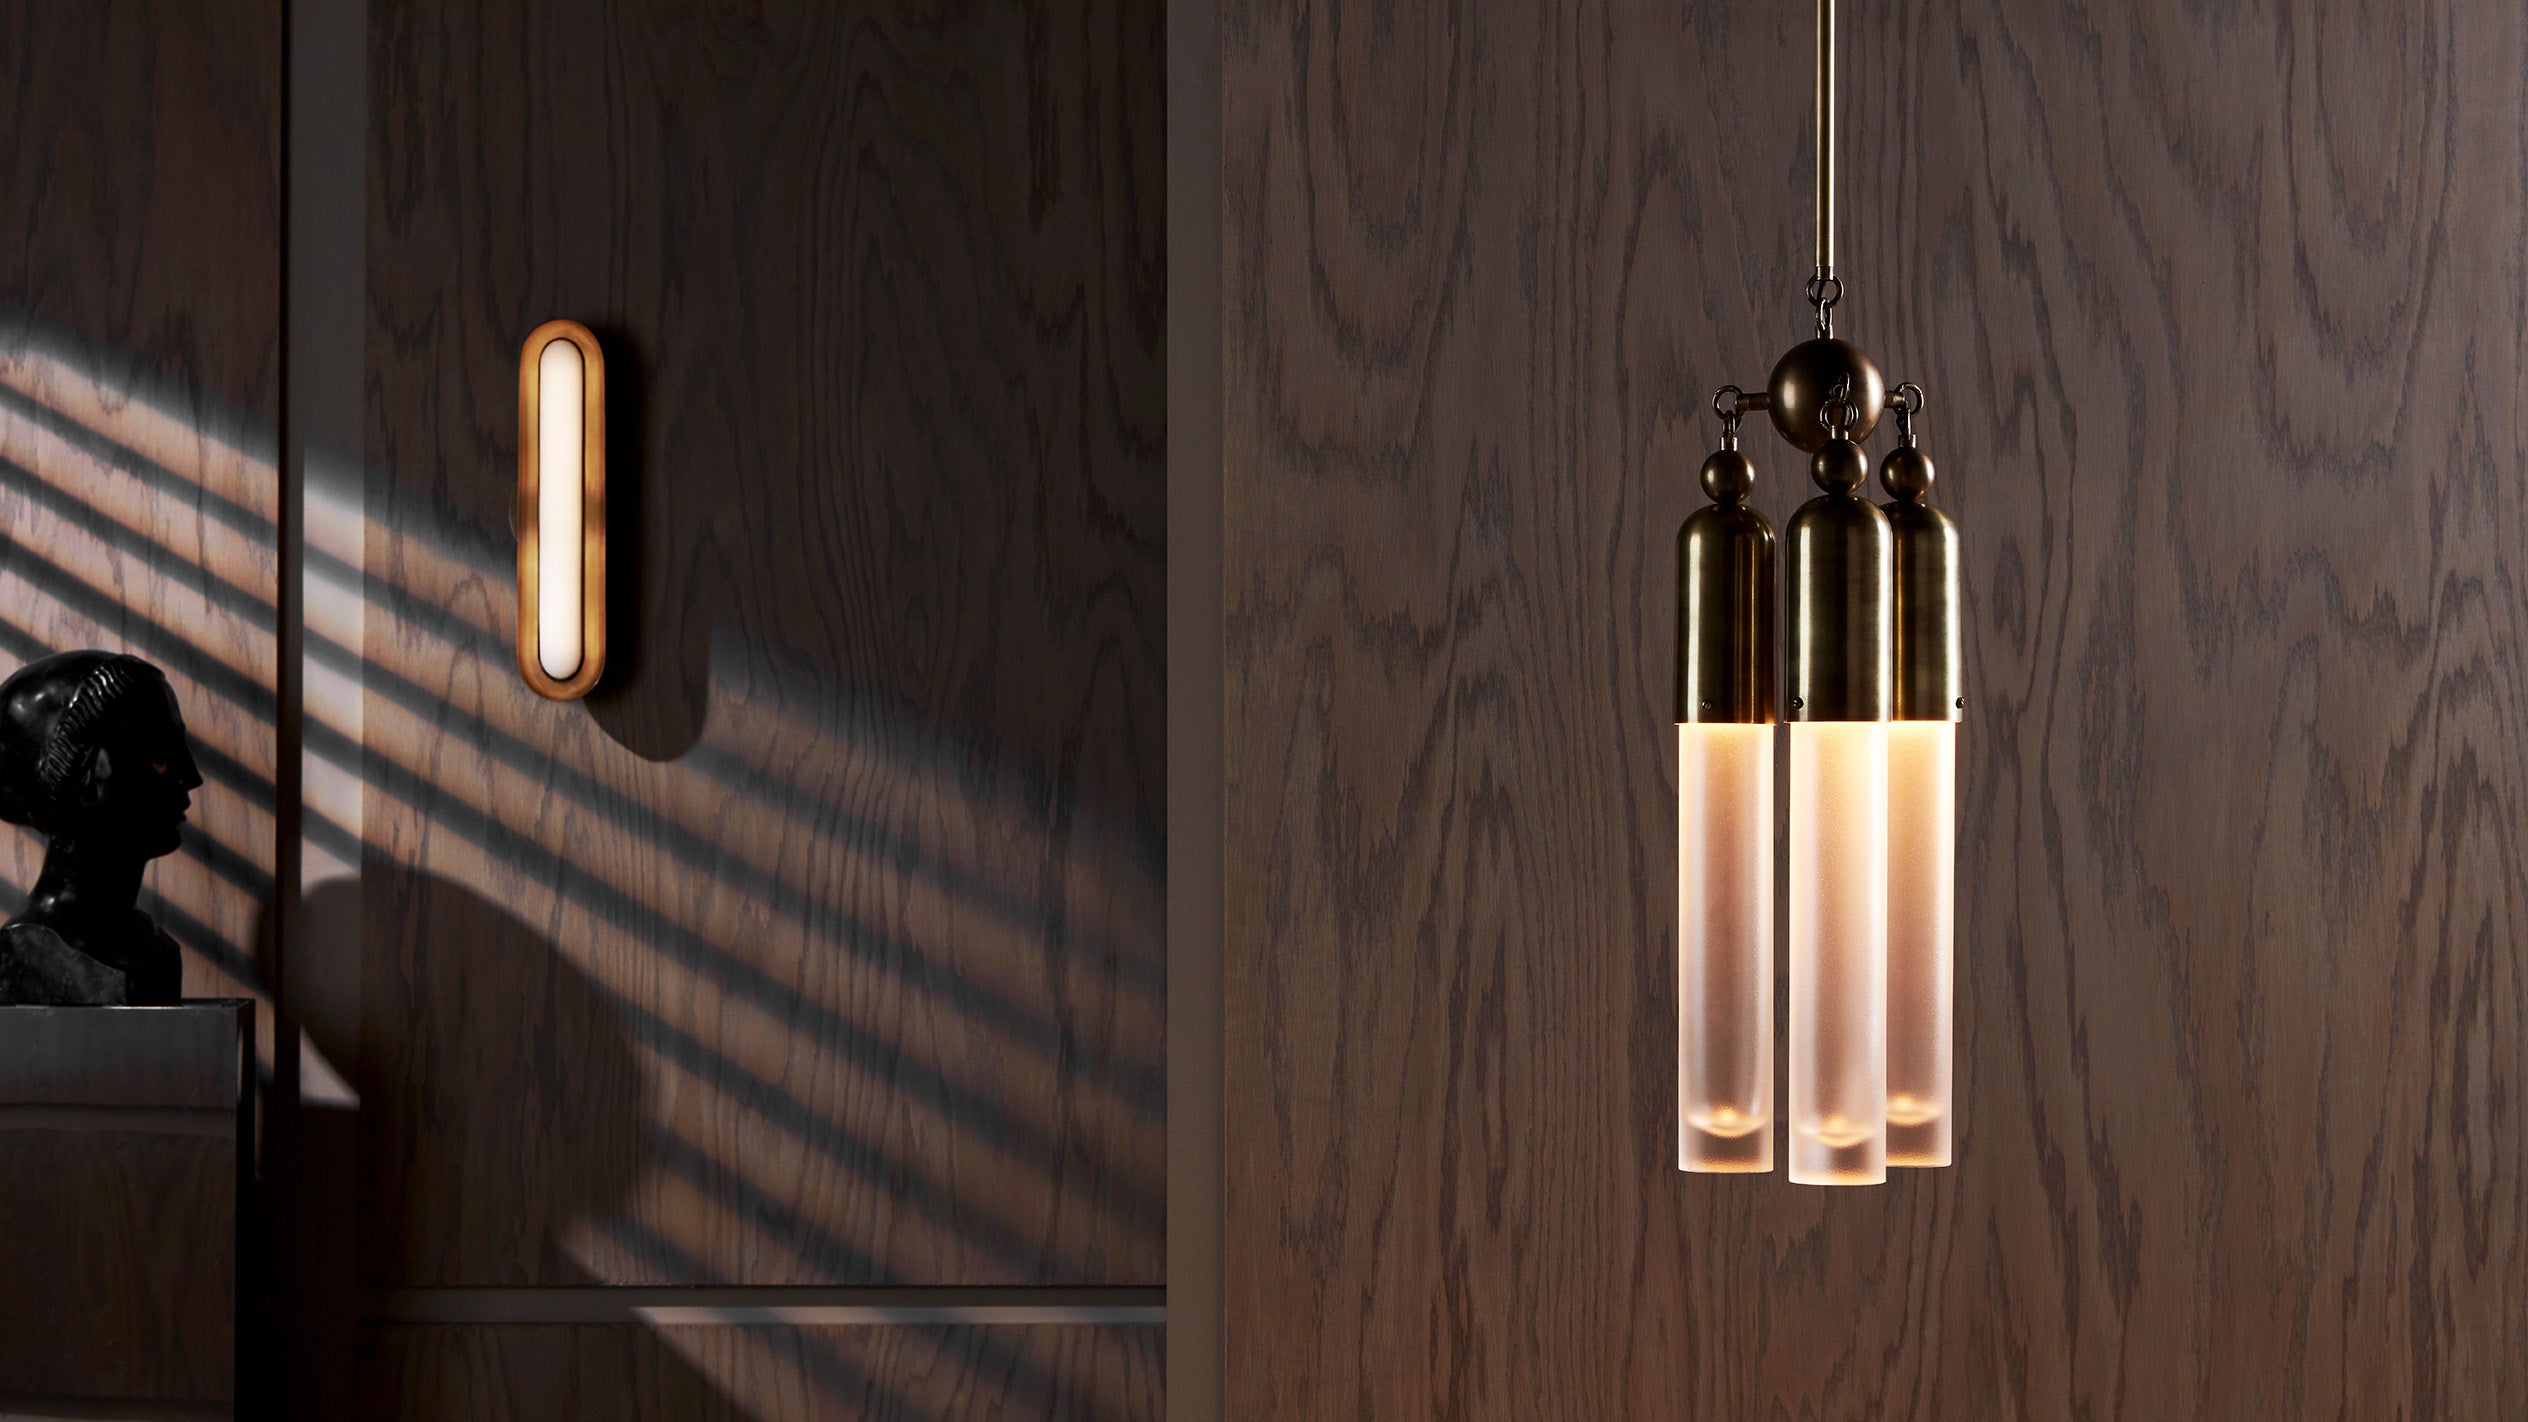 A CIRCUIT : 1 surface light mounted on a wall in the background, with a TASSEL : 3 pendant light hanging in the foreground. 